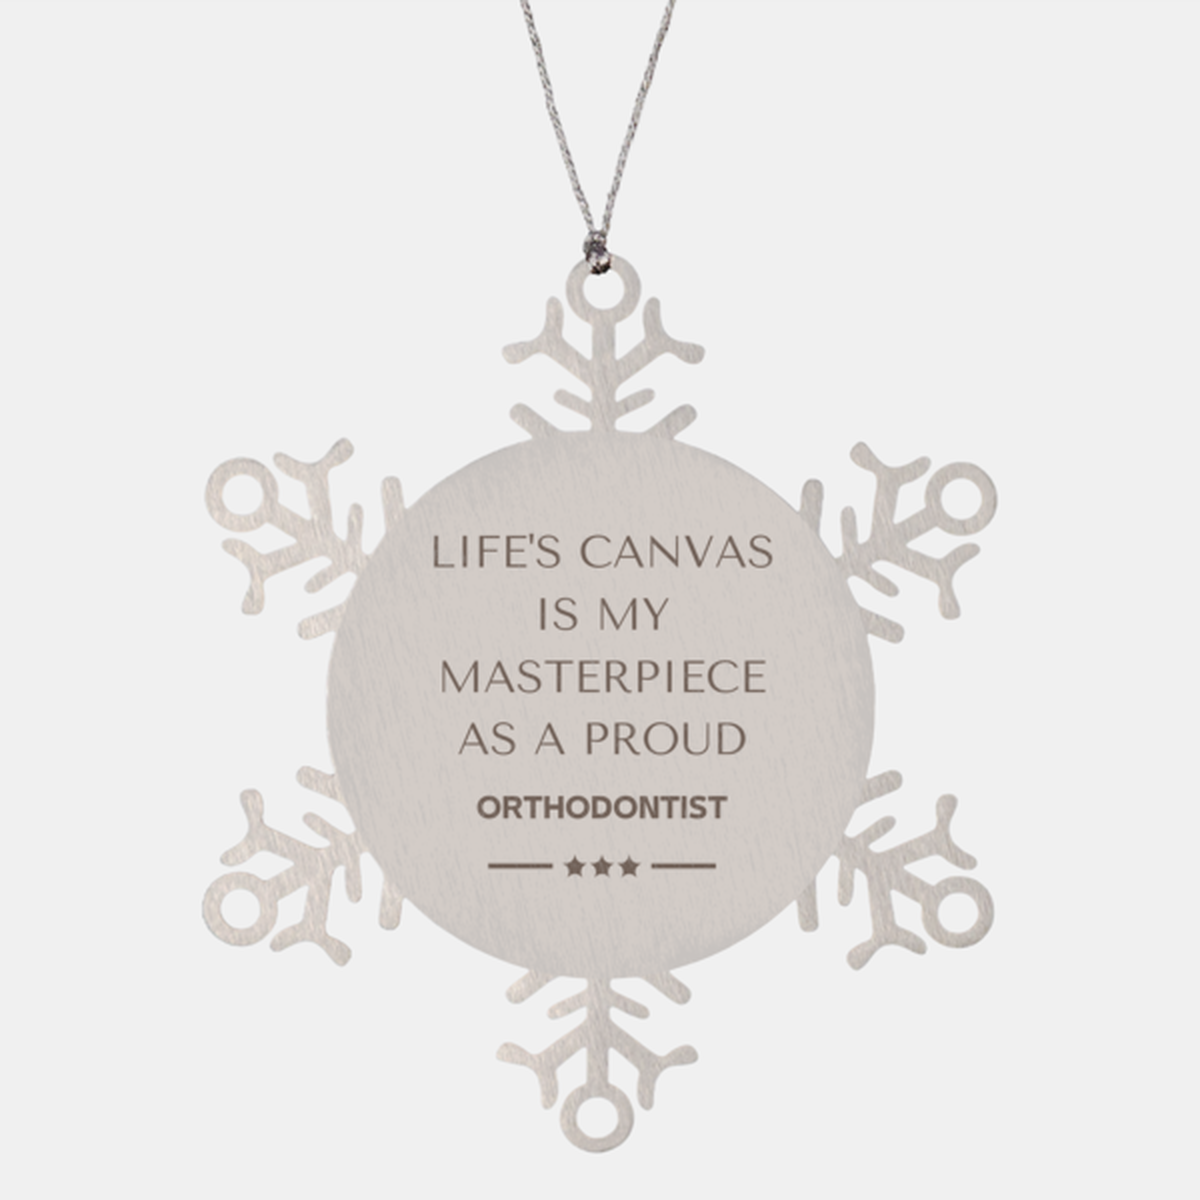 Proud Orthodontist Gifts, Life's canvas is my masterpiece, Epic Birthday Christmas Unique Snowflake Ornament For Orthodontist, Coworkers, Men, Women, Friends